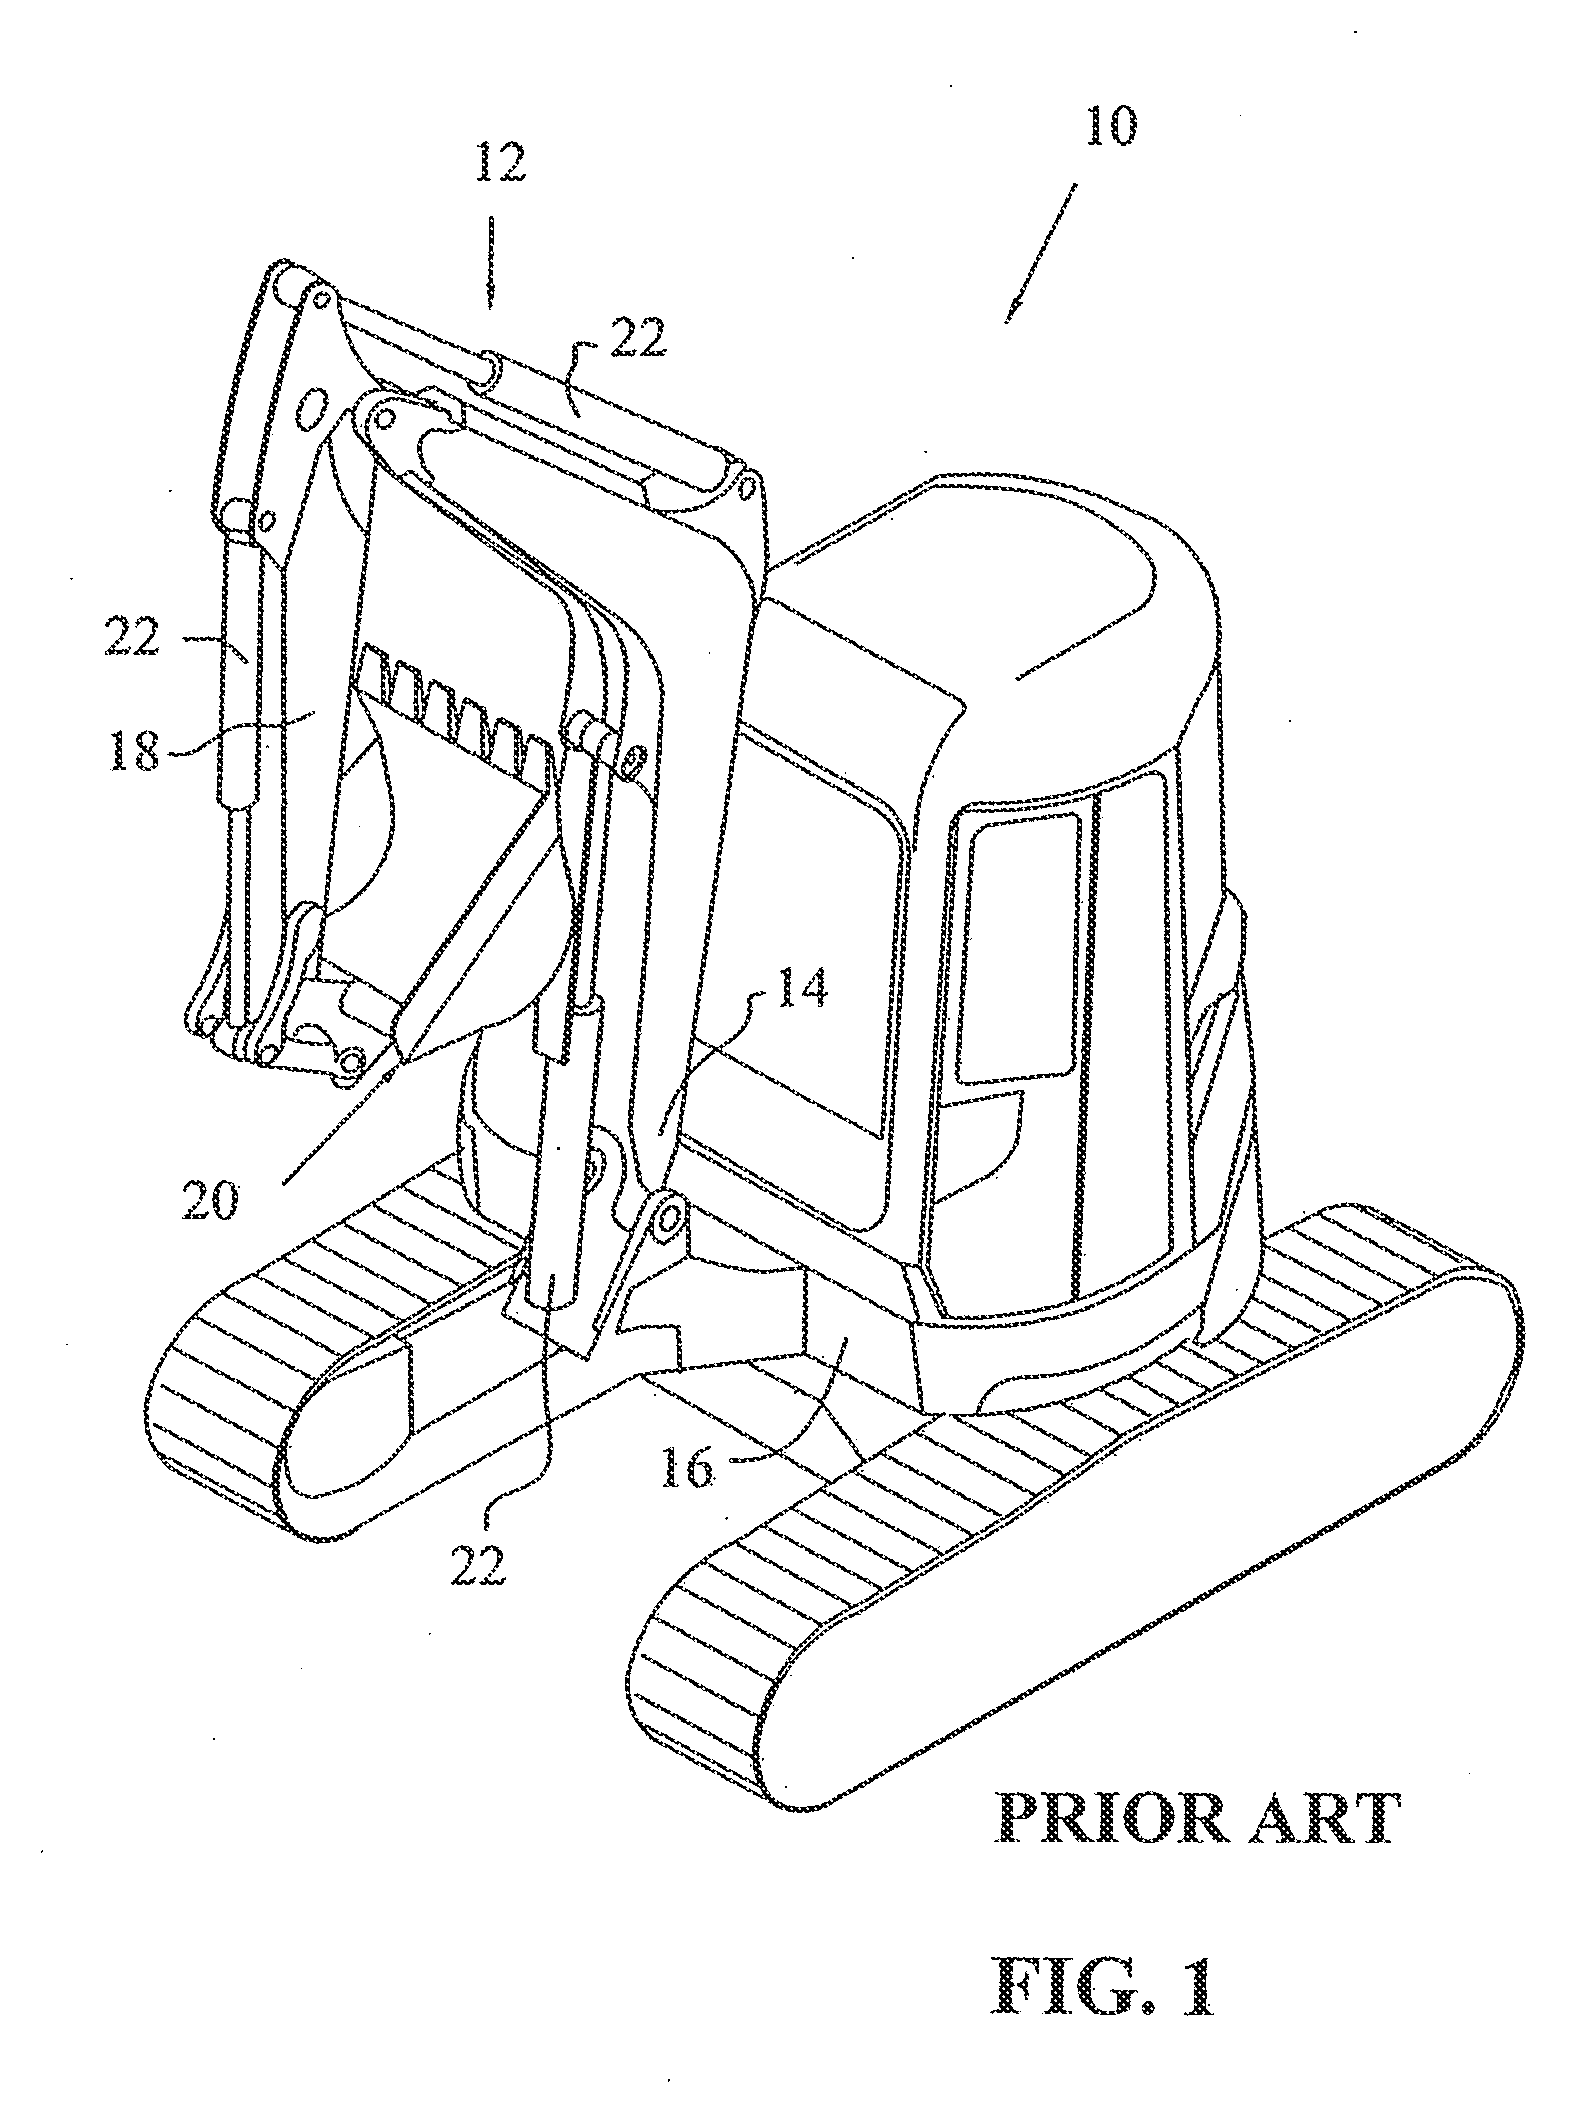 Trench wall ripper apparatus